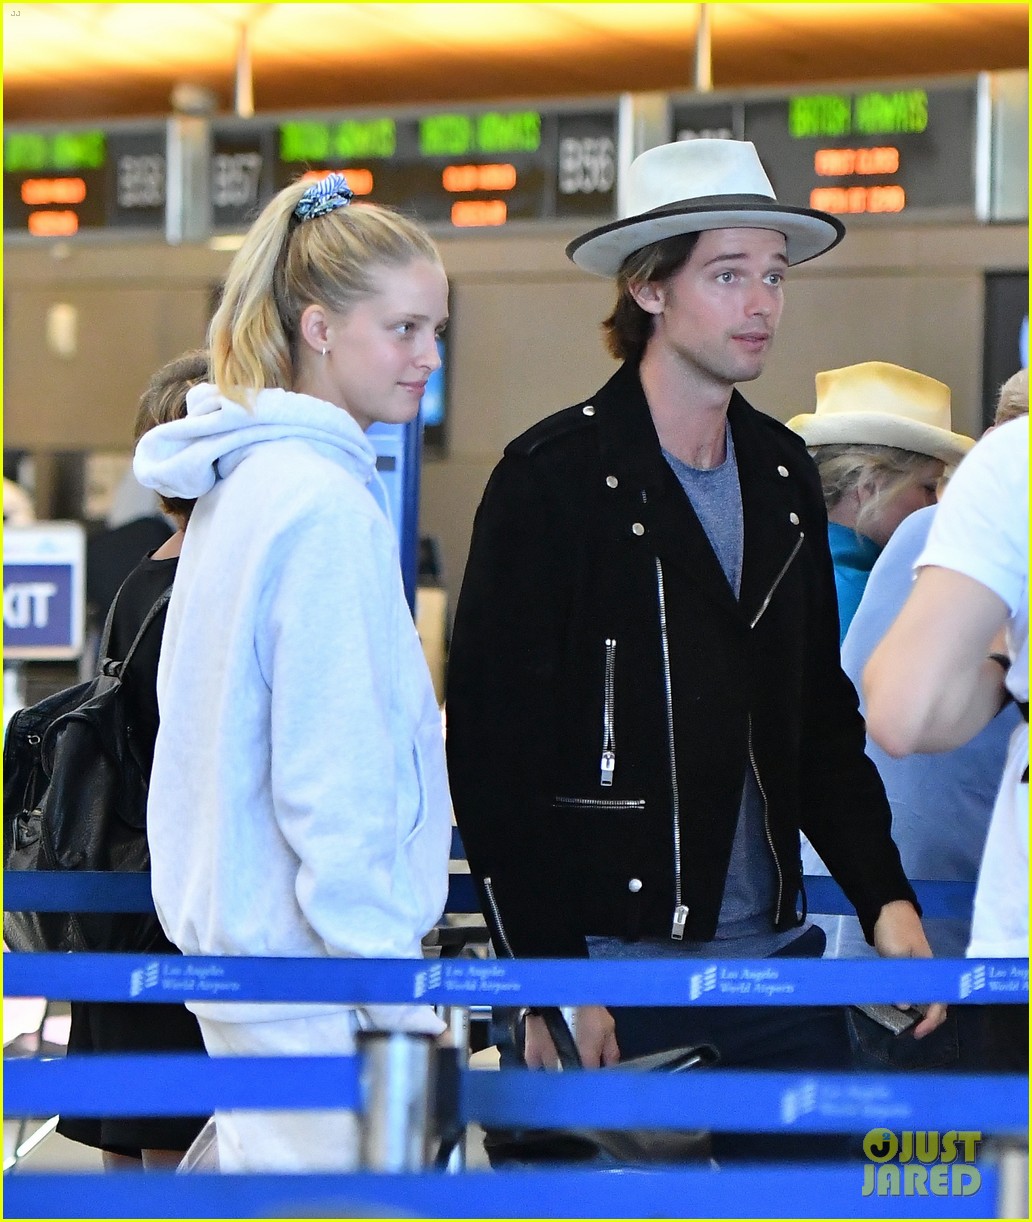 Full Sized Photo Of Patrick Schwarzenegger And Girlfriend Abby Champion Catch Flight Out Of Lax